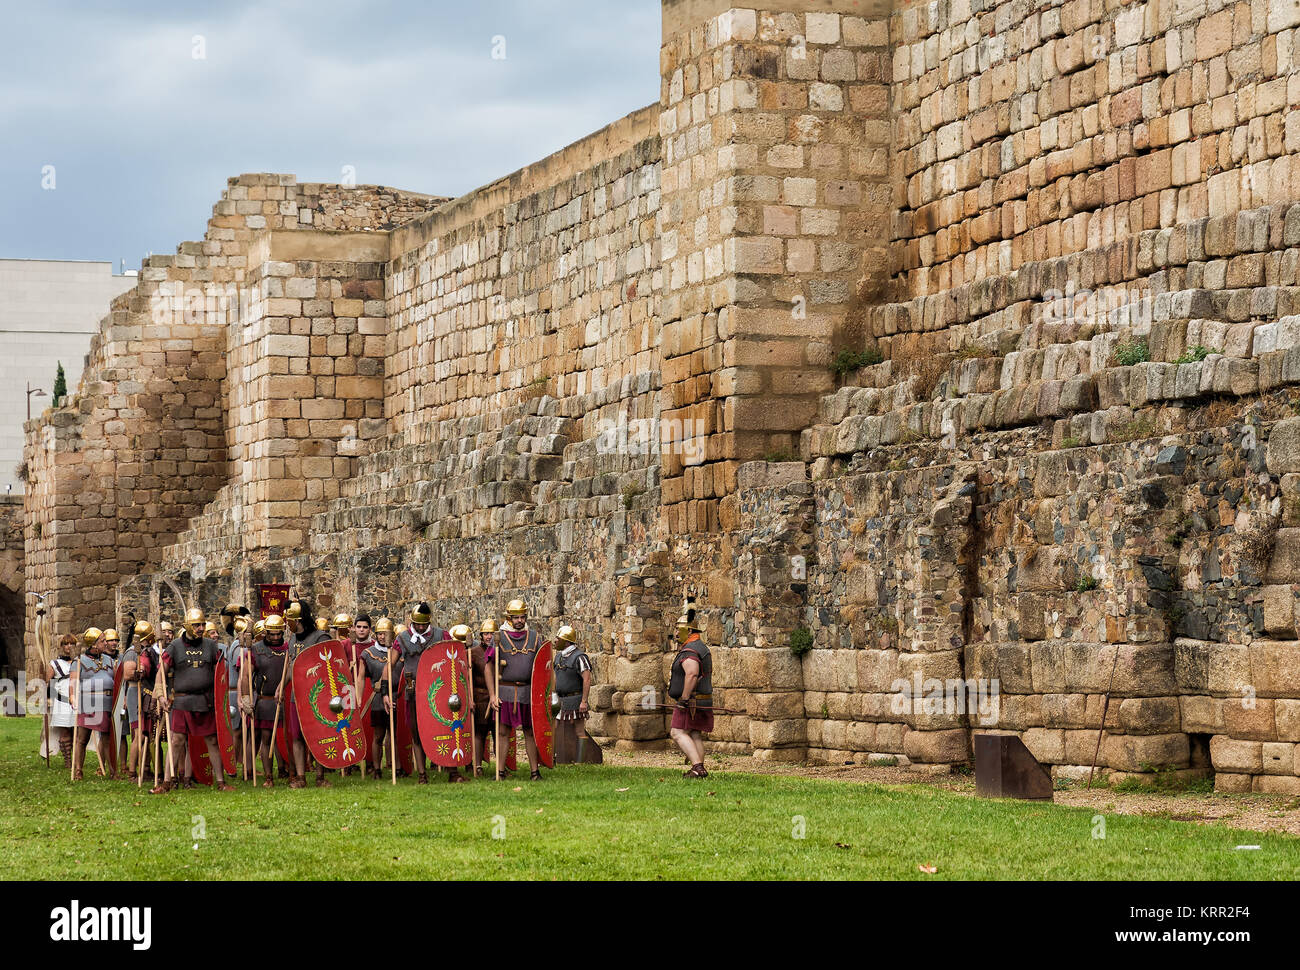 Merida, Spain - September 27, 2014: Several people dressed in costumes of Roman legionaries in the first century, involved in historical reenactment.  Stock Photo